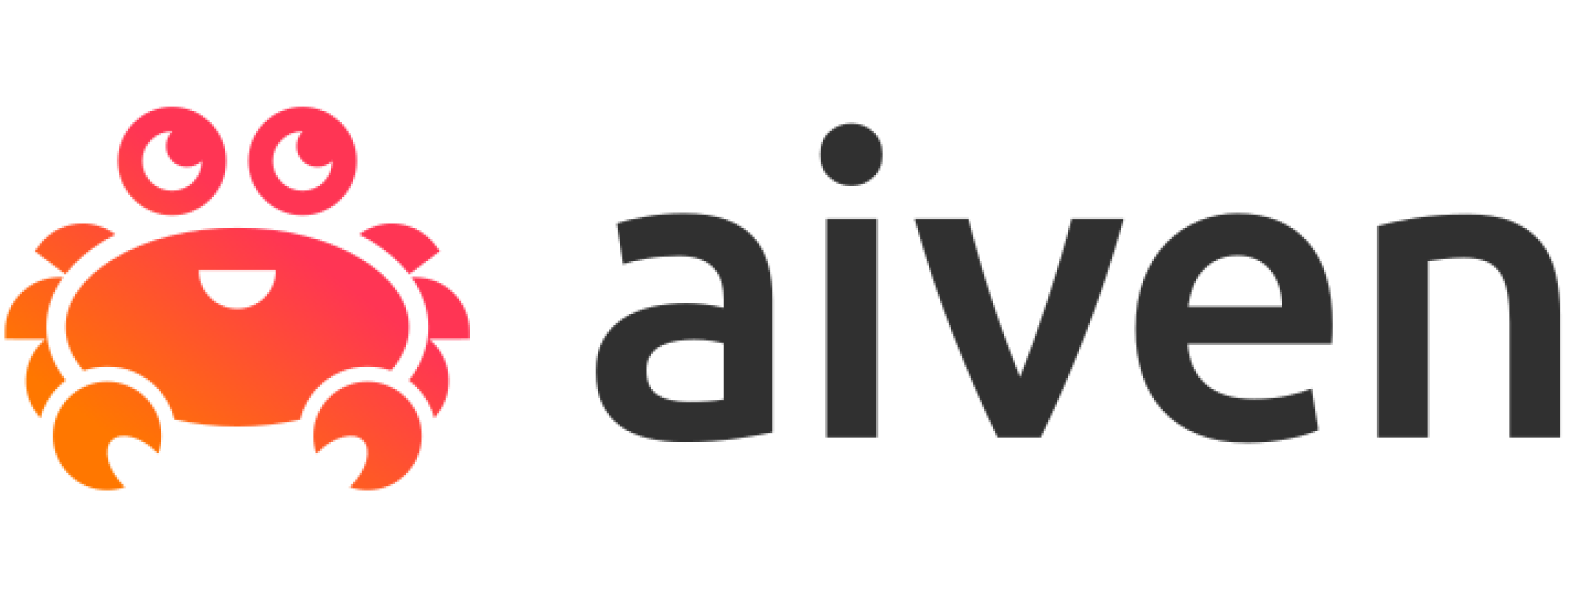 aiven Conference Sponsor